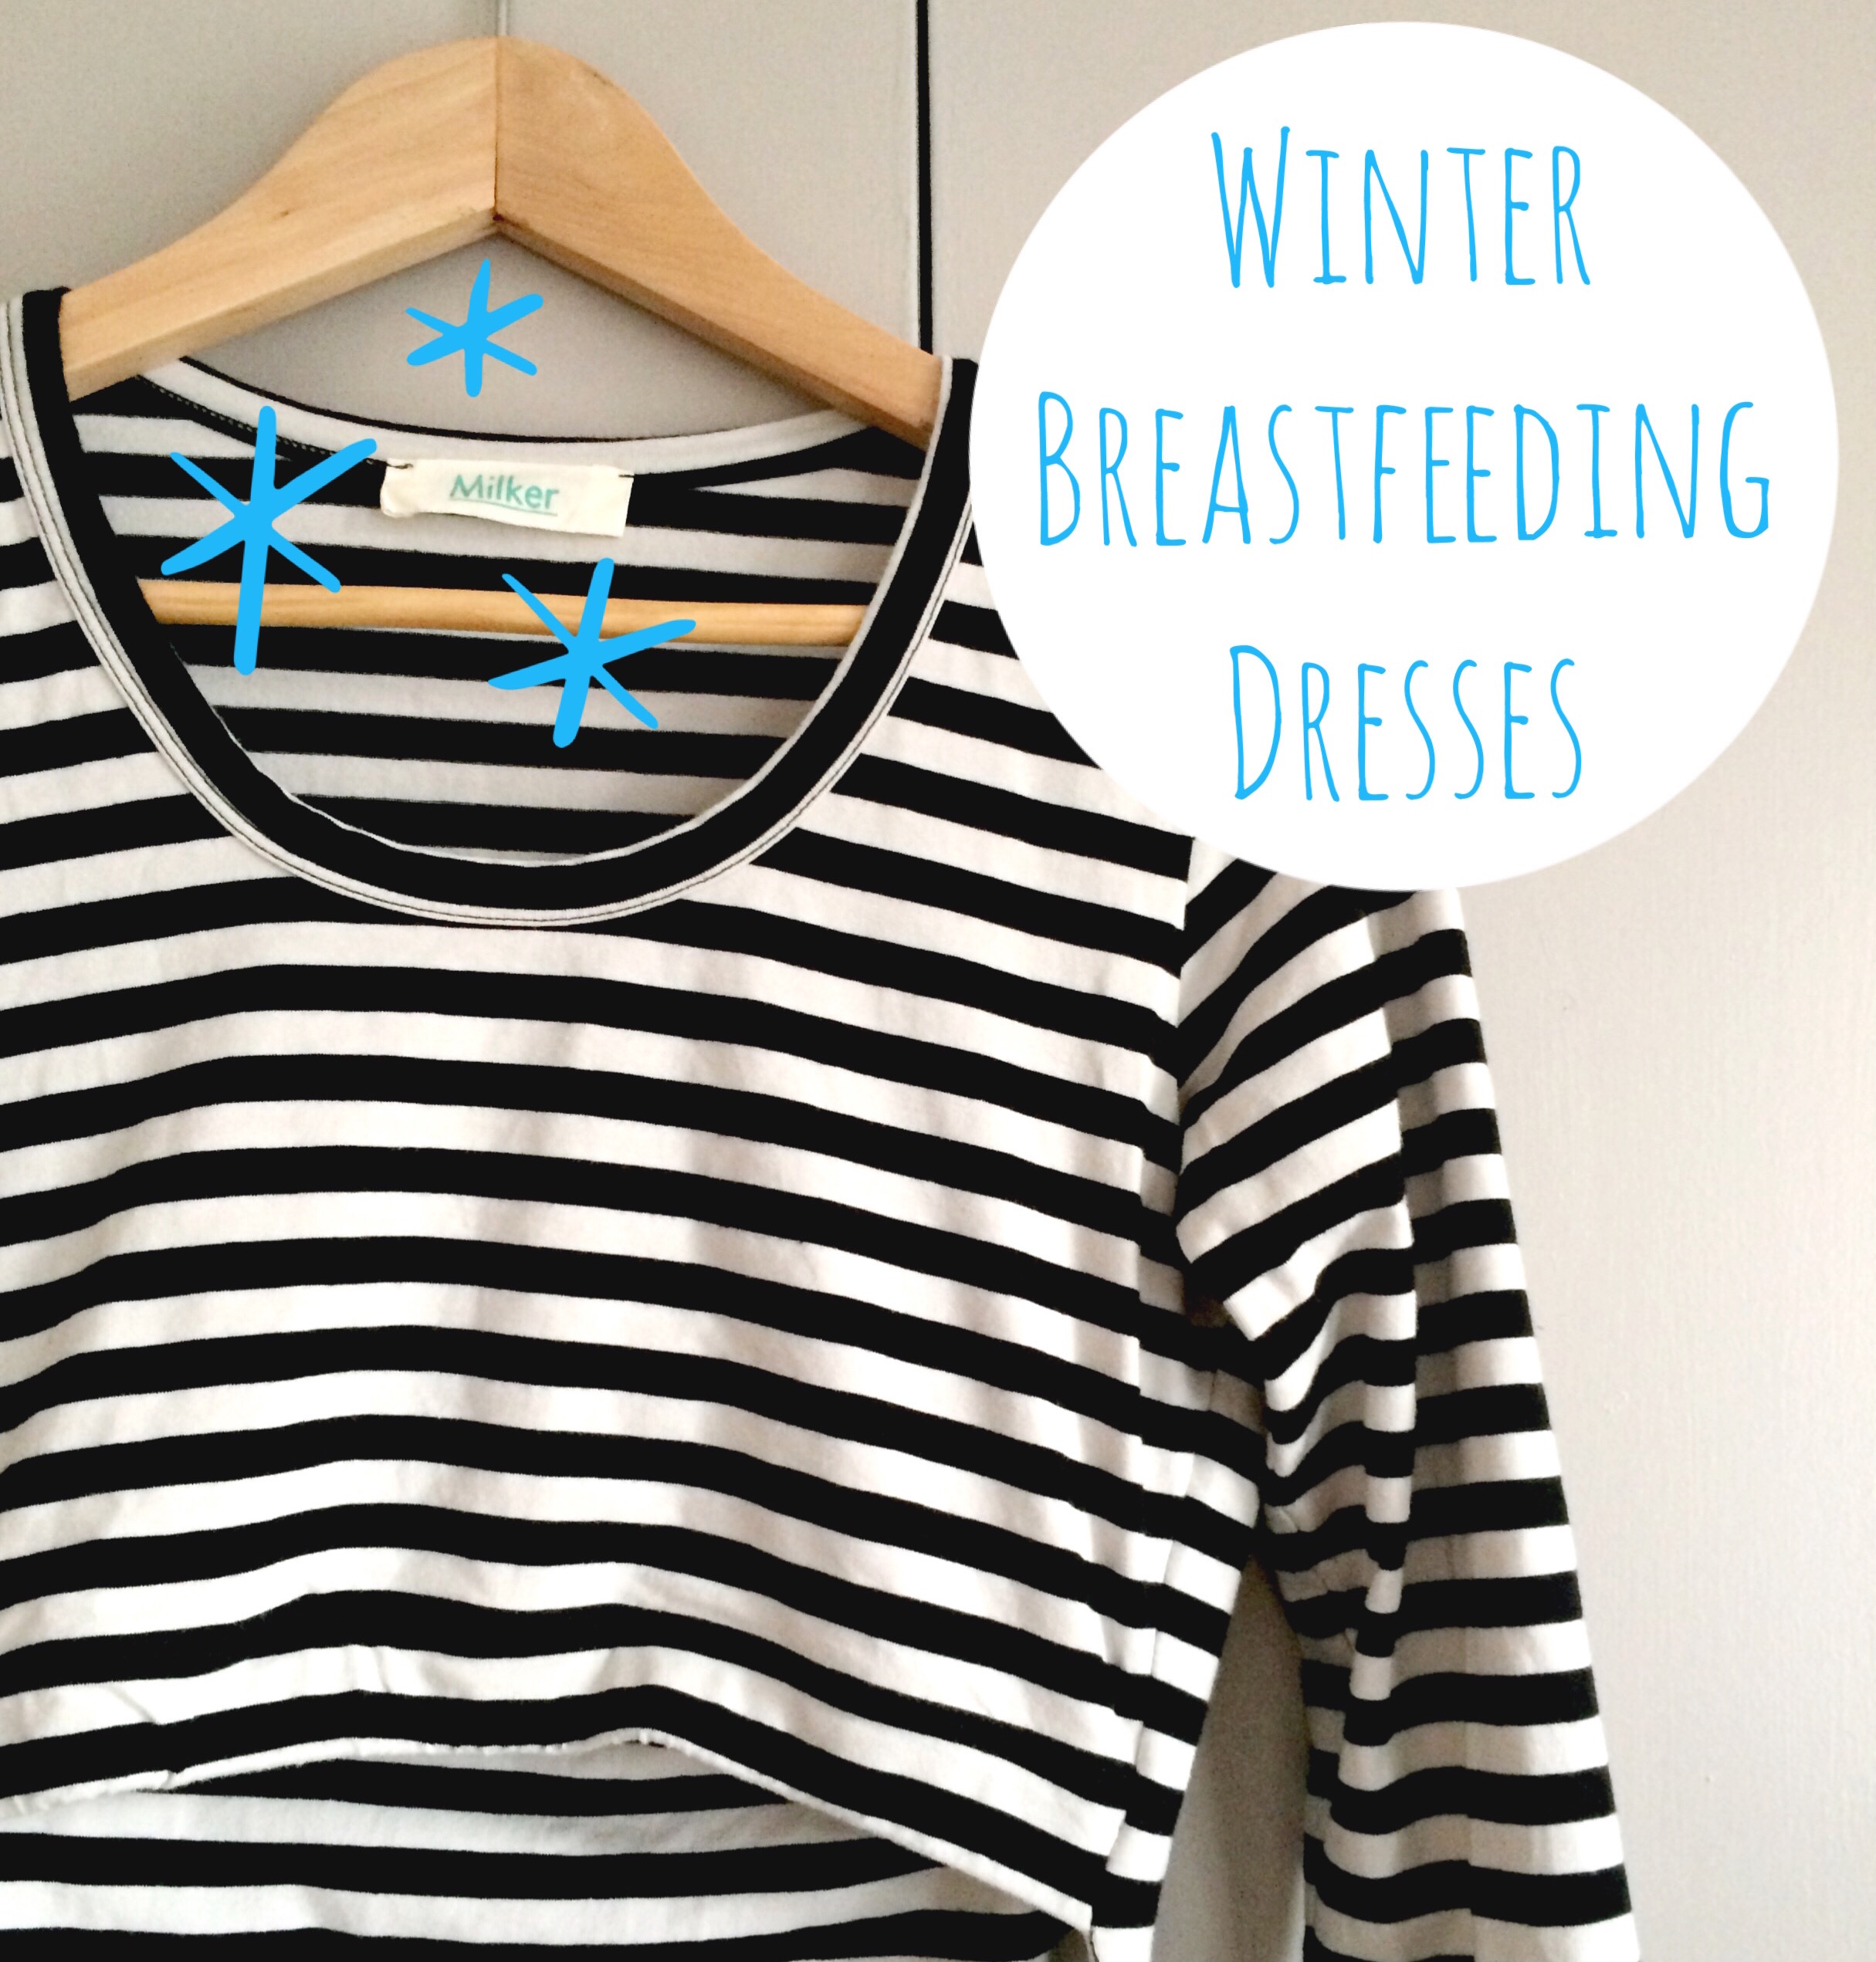 Dresses suitable for breastfeeding in winter